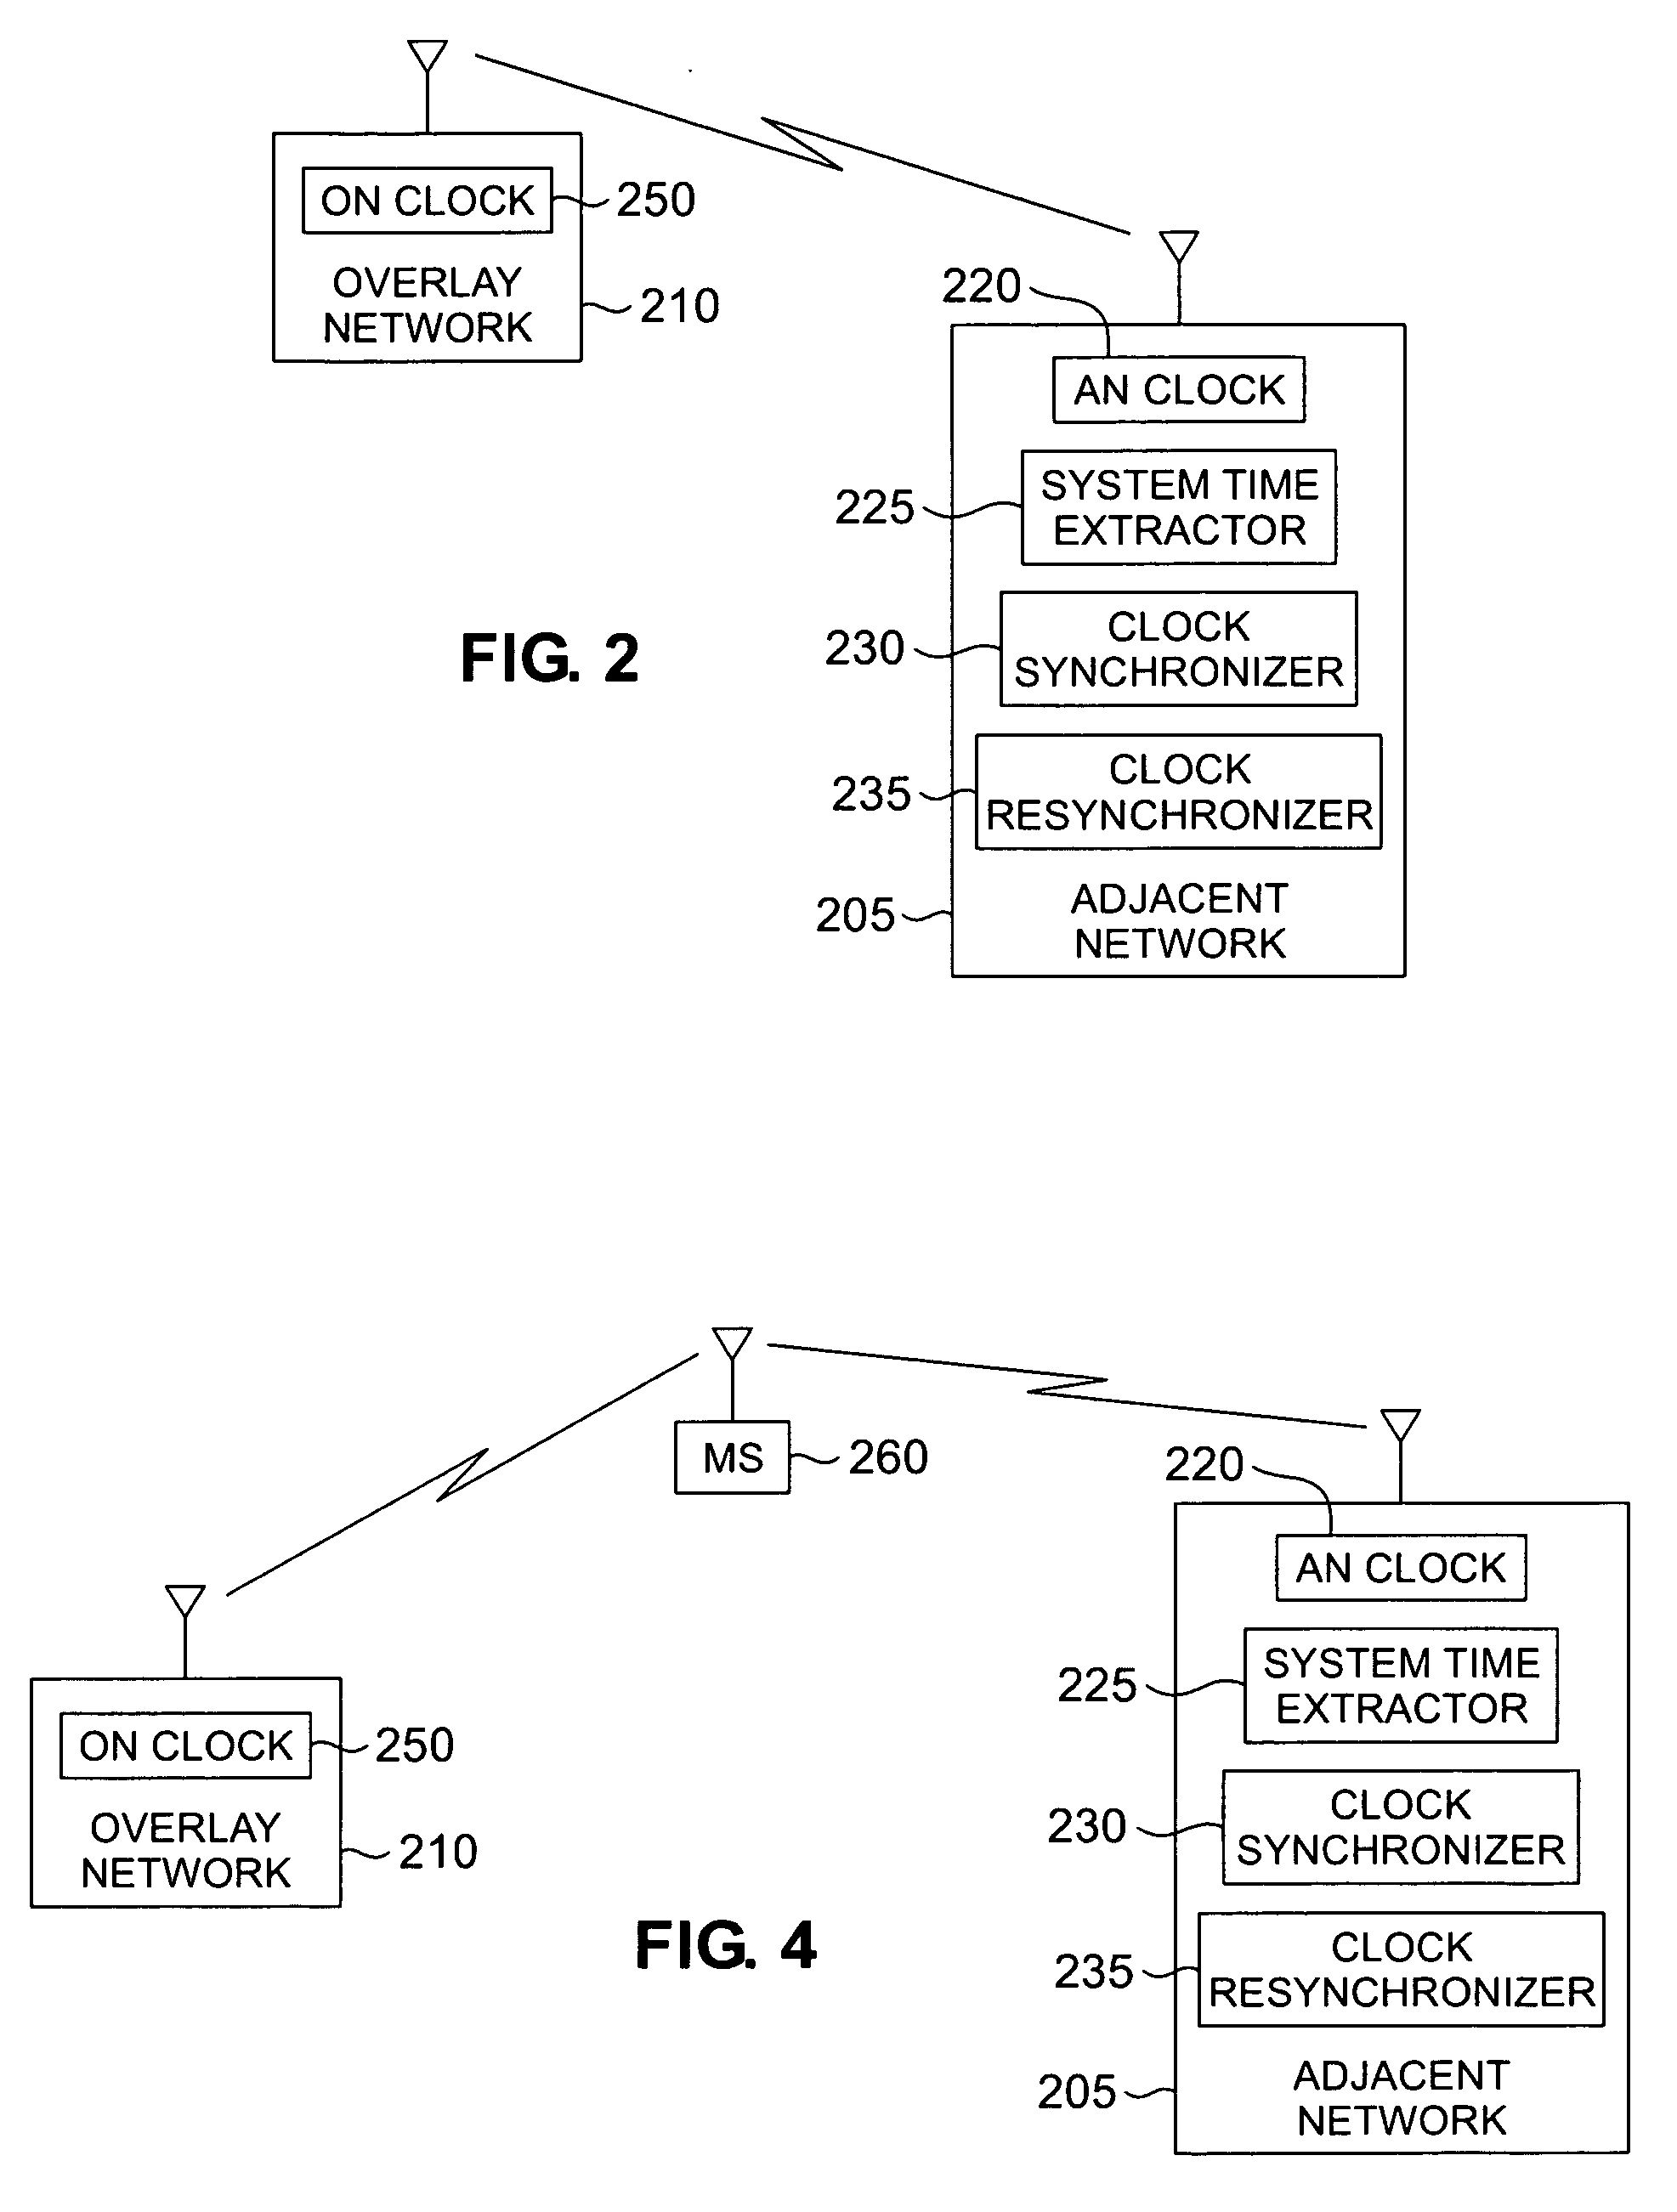 Method and system for synchronizing a clock for an adjacent network to a clock for an overlay network